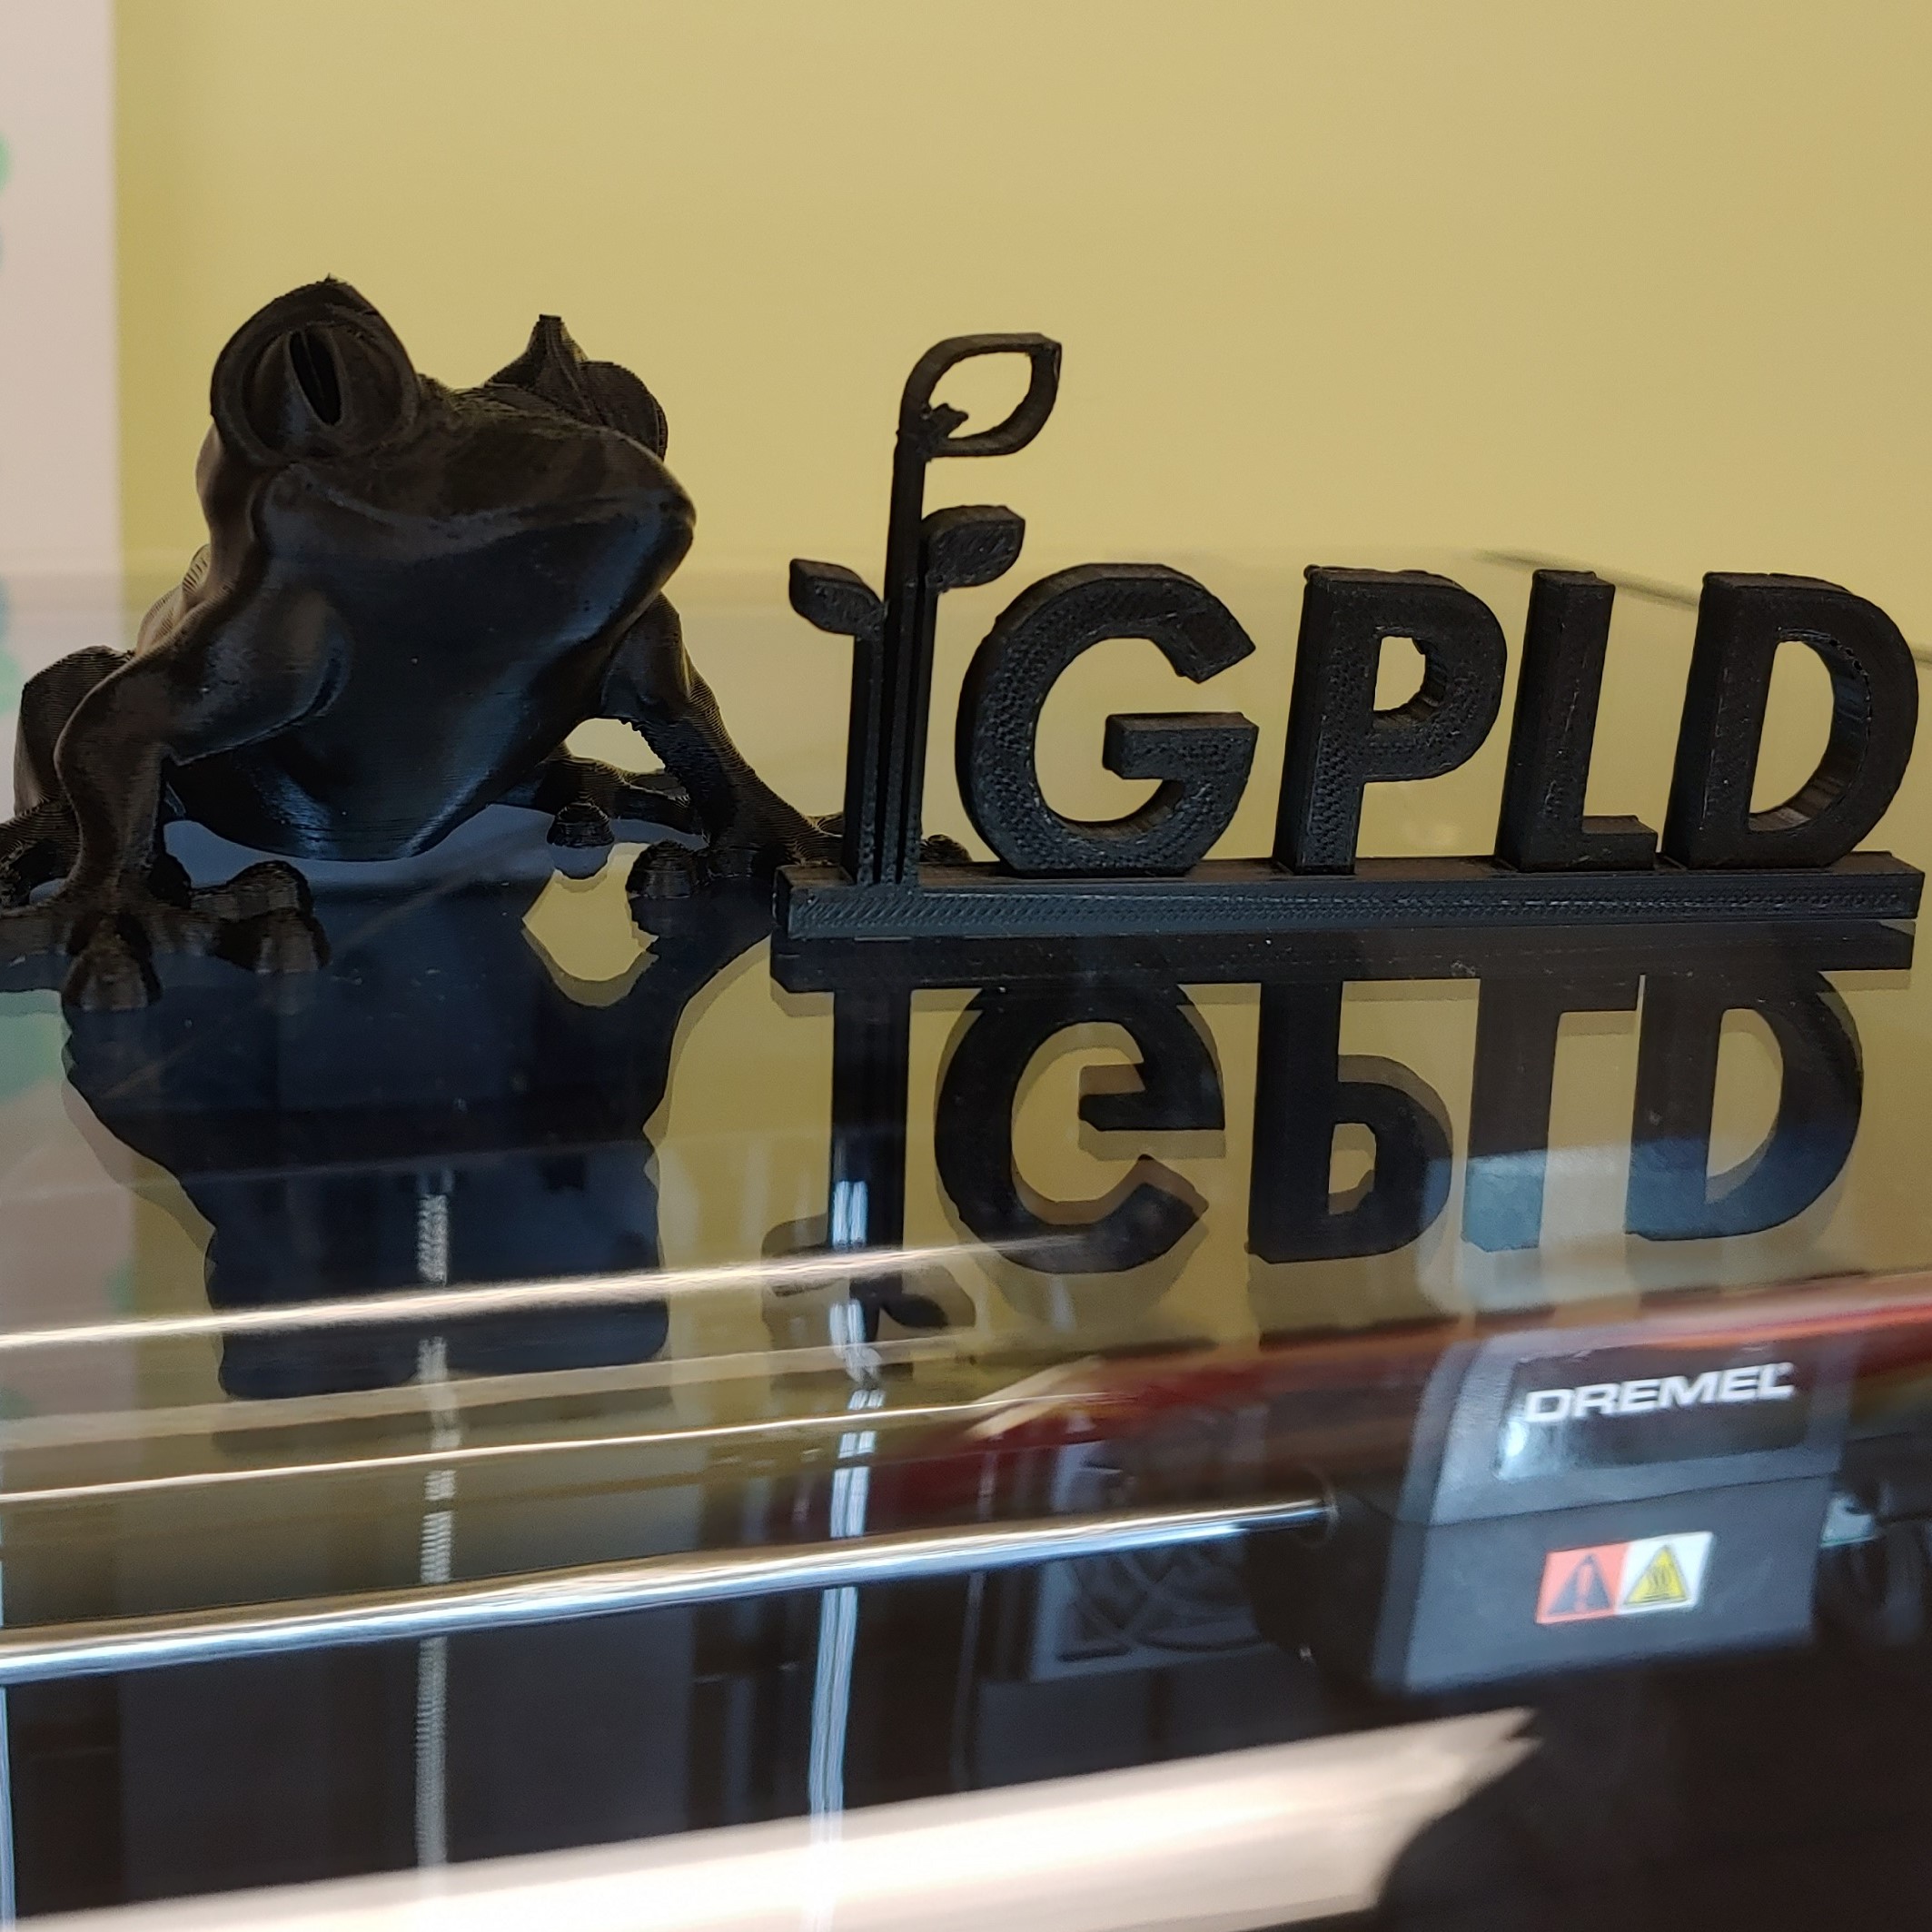 black 3d printed tree frog sitting on top of a dremel 3d printer next to a black 3d printed version of the gpld logo